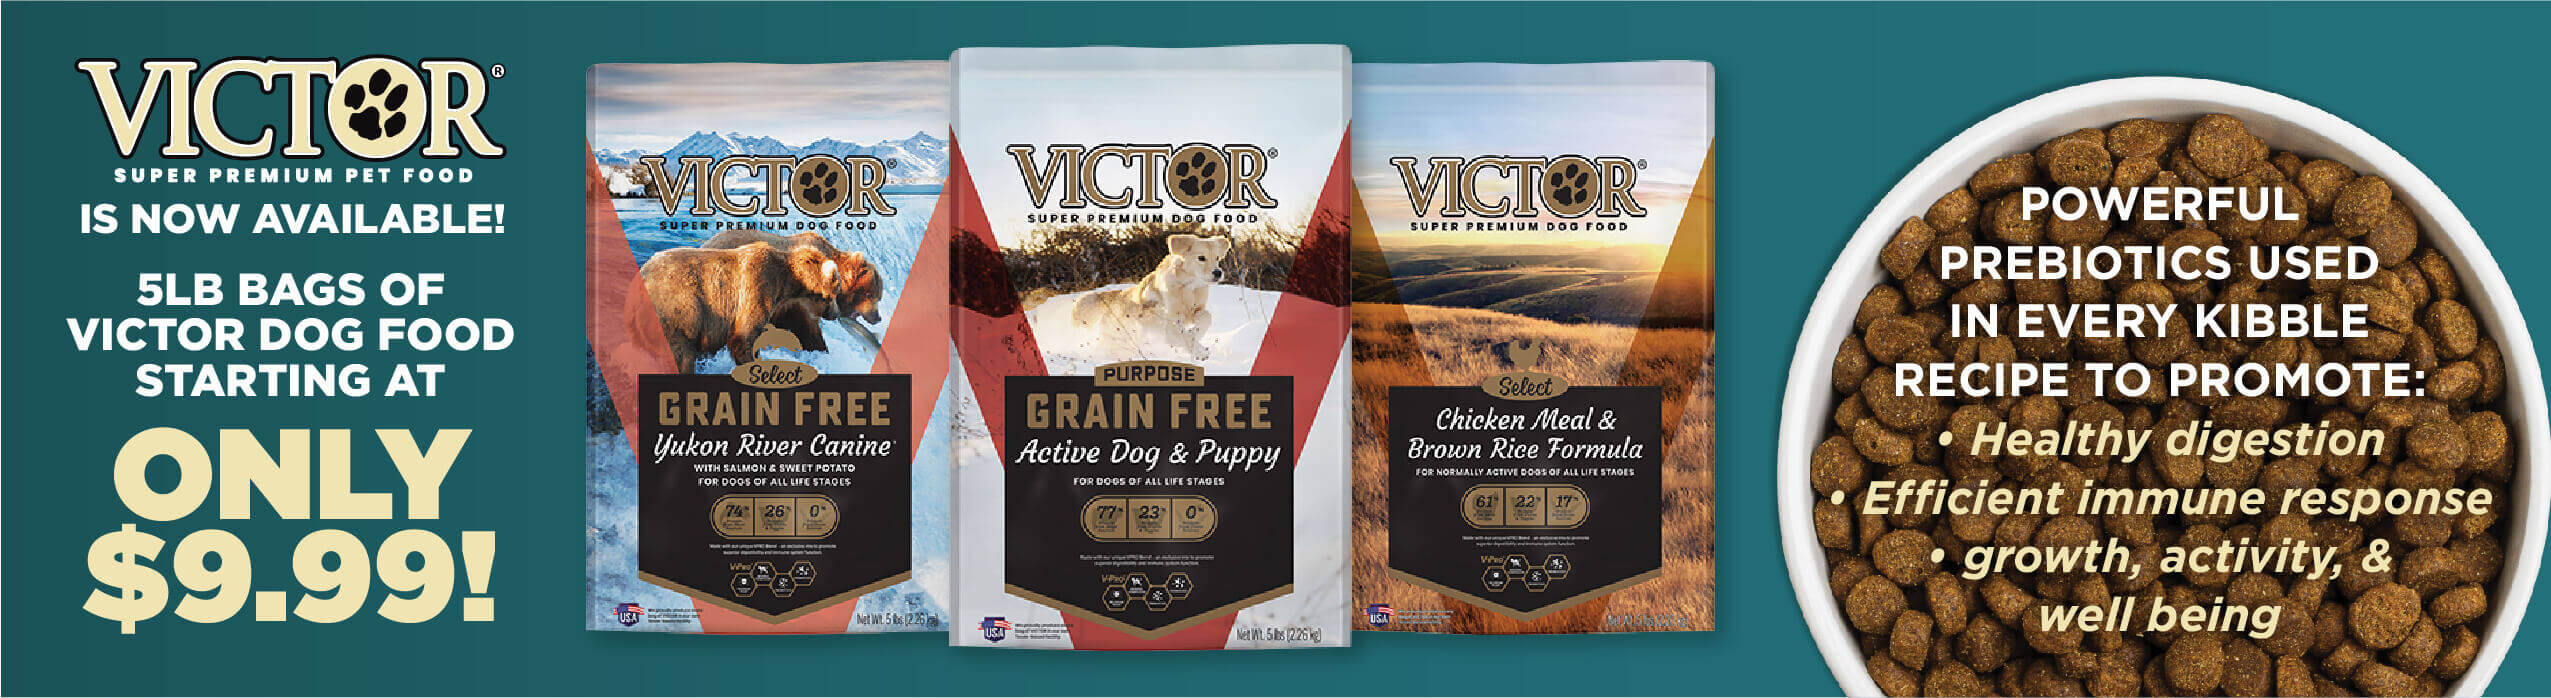 5lb Bags of Victor Dog Food Starting at $9.99